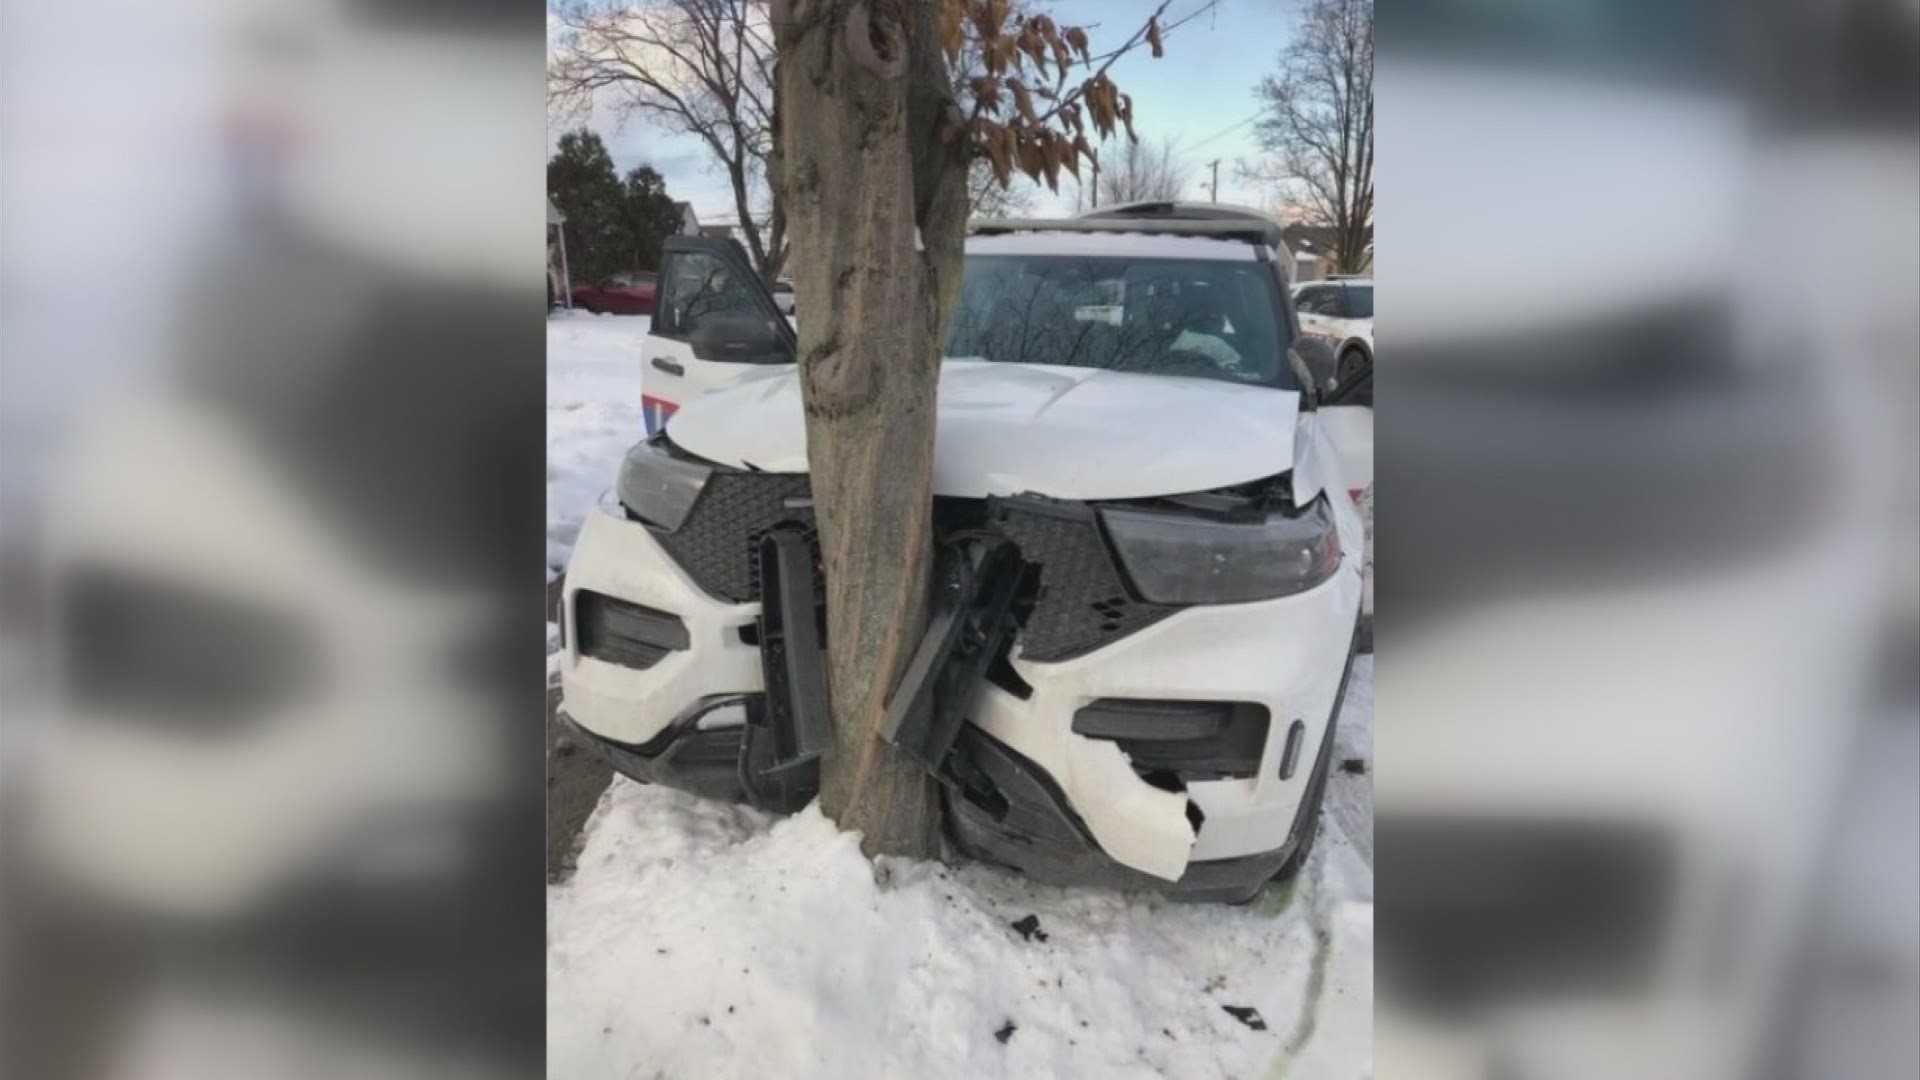 Police say two officers had joined in a search for a stolen car, and several suspects inside, when one of the officers slammed the cruiser into a tree.